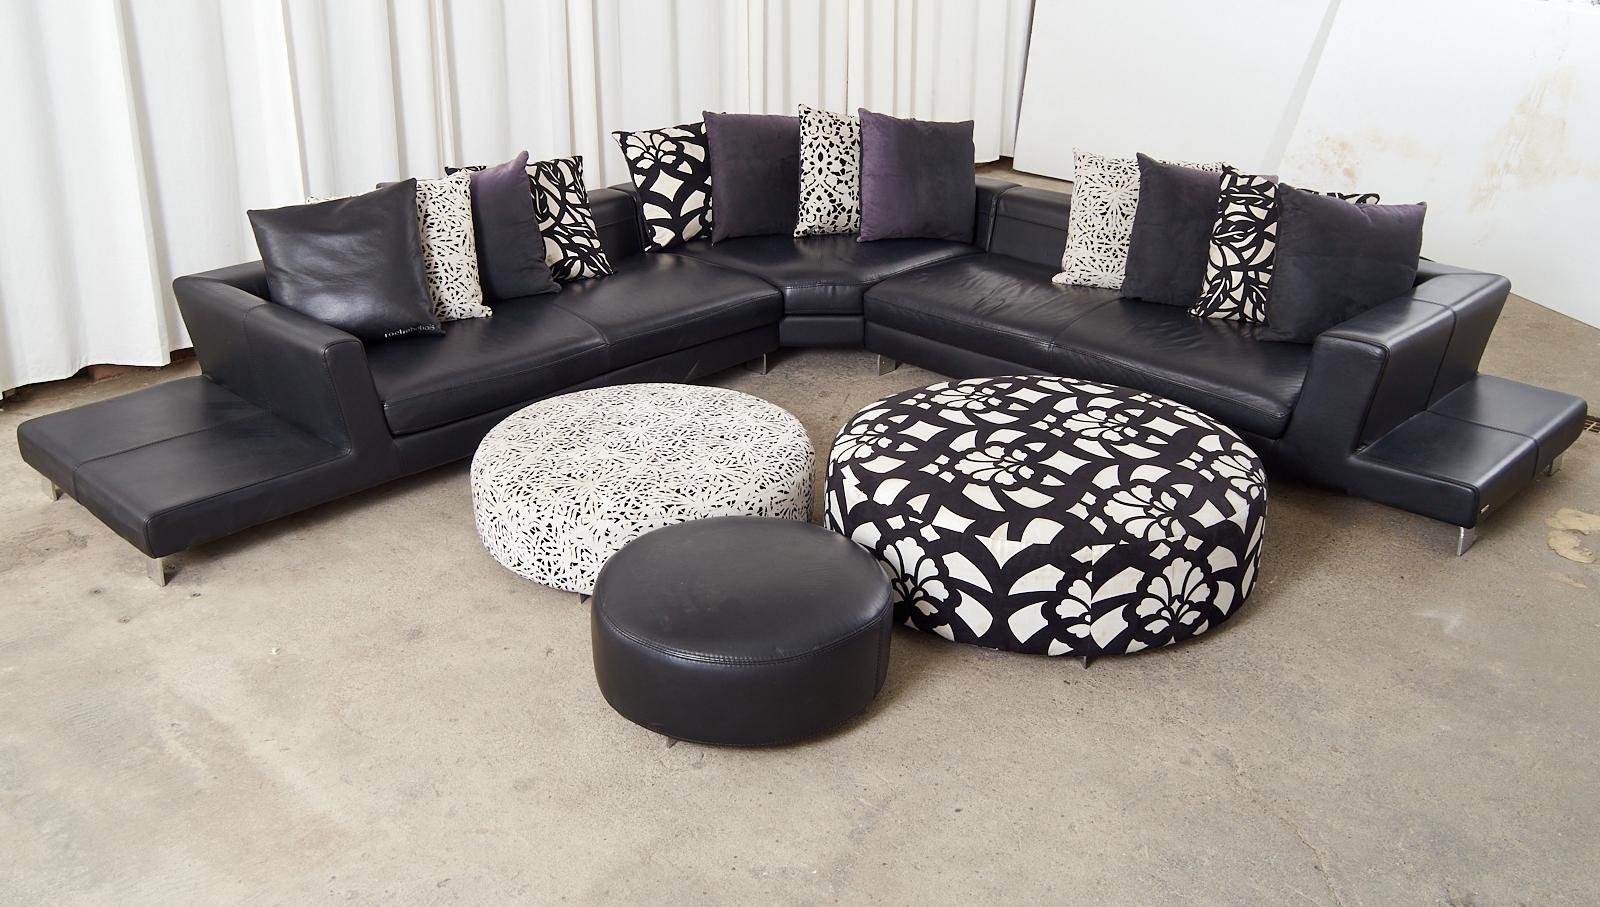 Chic black leather sectional sofa set crafted by Roche Bobois artisans in Italy. Features a monumental living room set comprised of three modular pieces and includes three round ottomans and 12 throw pillows. The large sectionals designed with